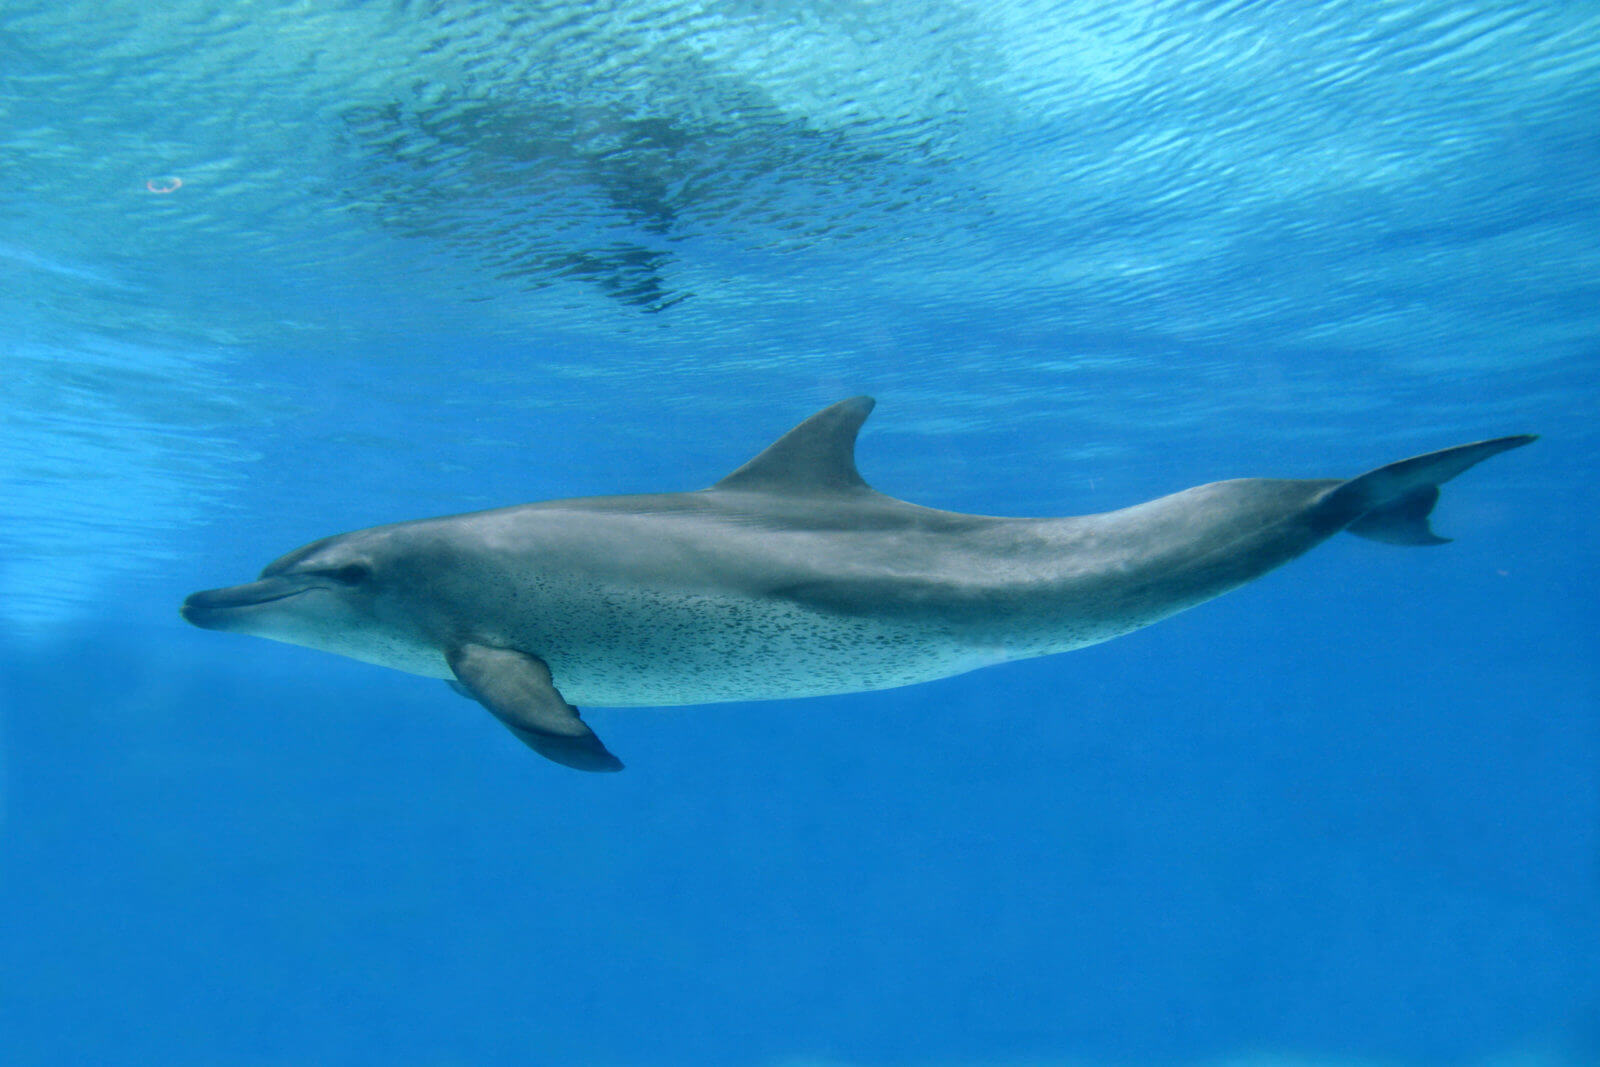 SST CAN DOLPHINS GET SICK LIKE HUMANS DO